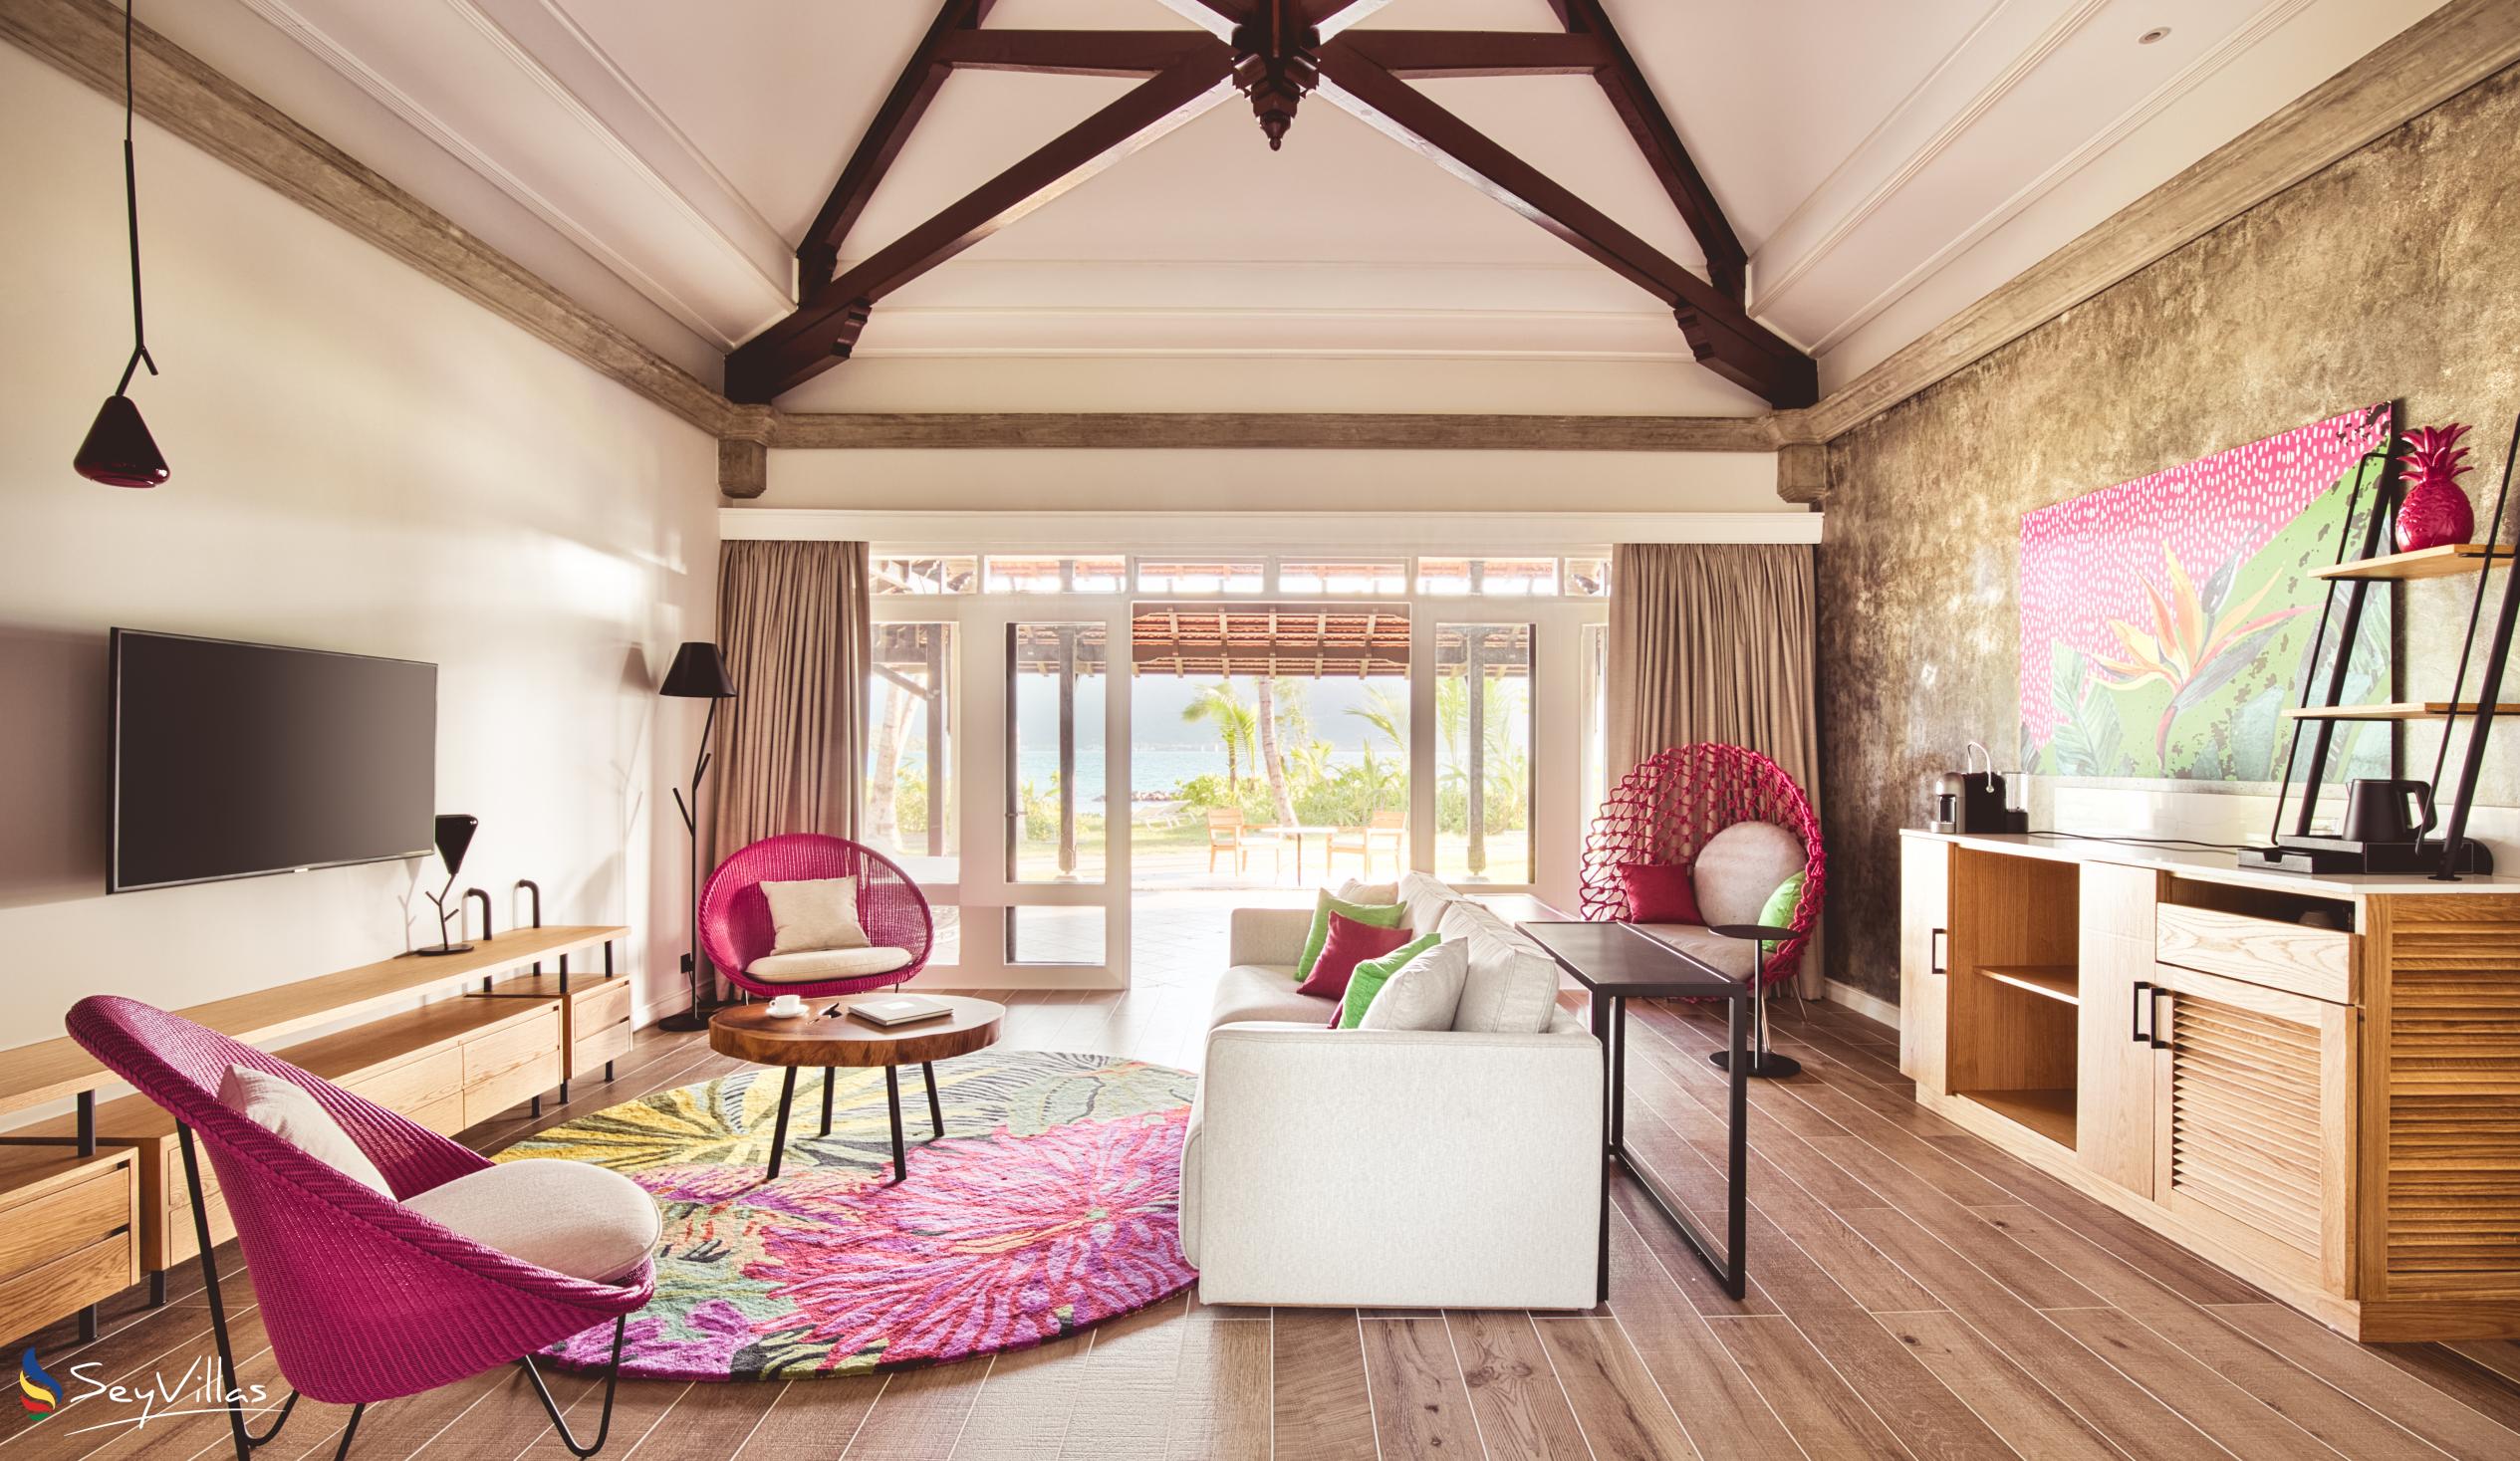 Photo 91: Club Med Seychelles - Family Suite with Private Pool - Saint Anne (Seychelles)